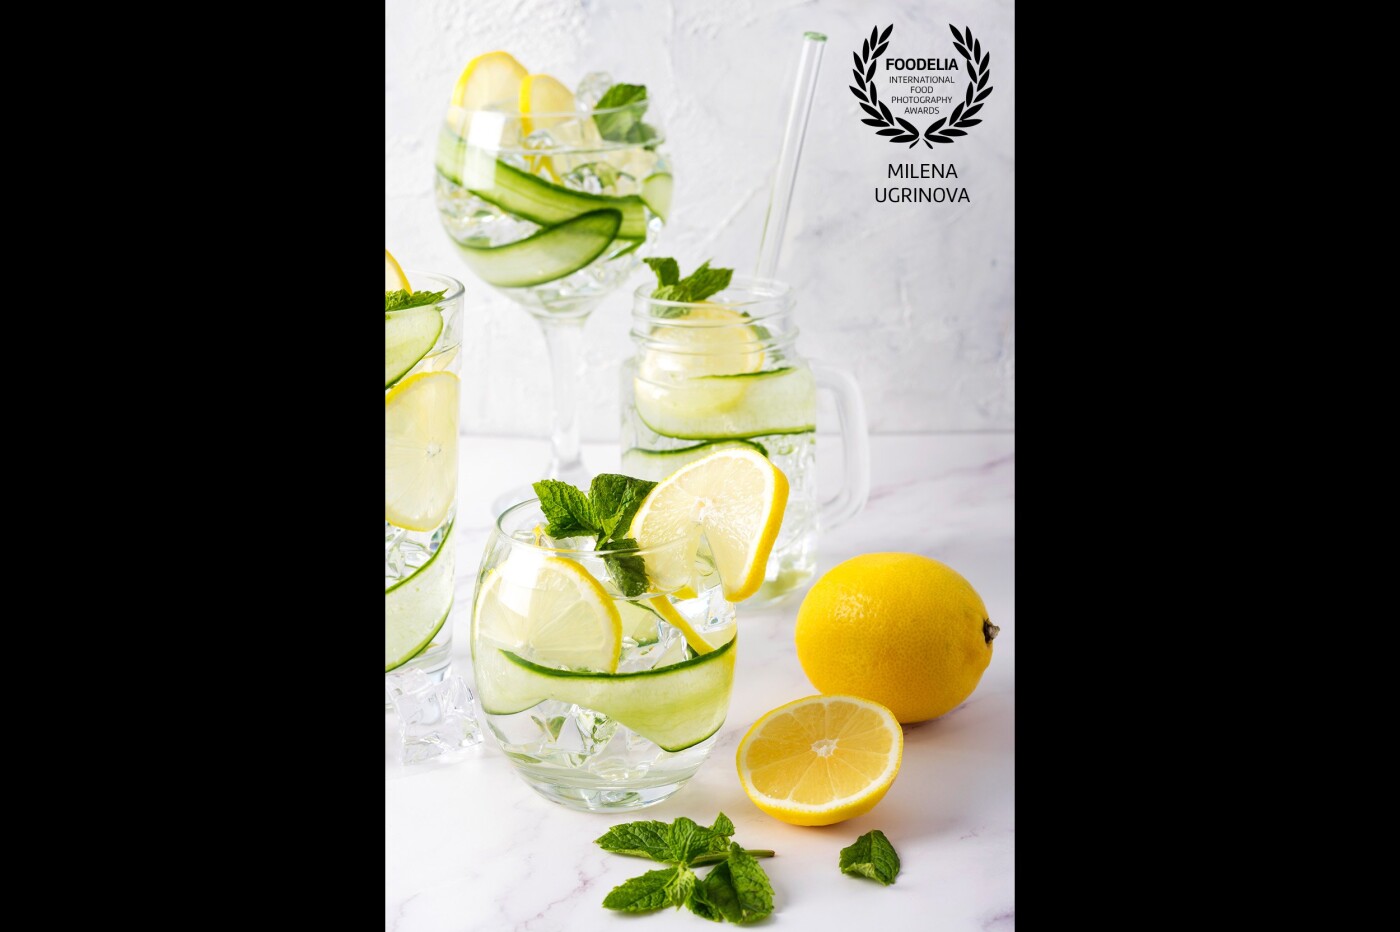 While dreaming for the hot summer, or just as a refreshment, get yourself a glass of G&T.<br />
I was going to a classic side lighting and simple background to accent the different type of glasses. The colours are limited to green and yellow for a fresh look and feel. I've chosen the front view to show the diversity of the glass heights and give the feeling of a depth. <br />
I hope my picture will make you thirsty ;)